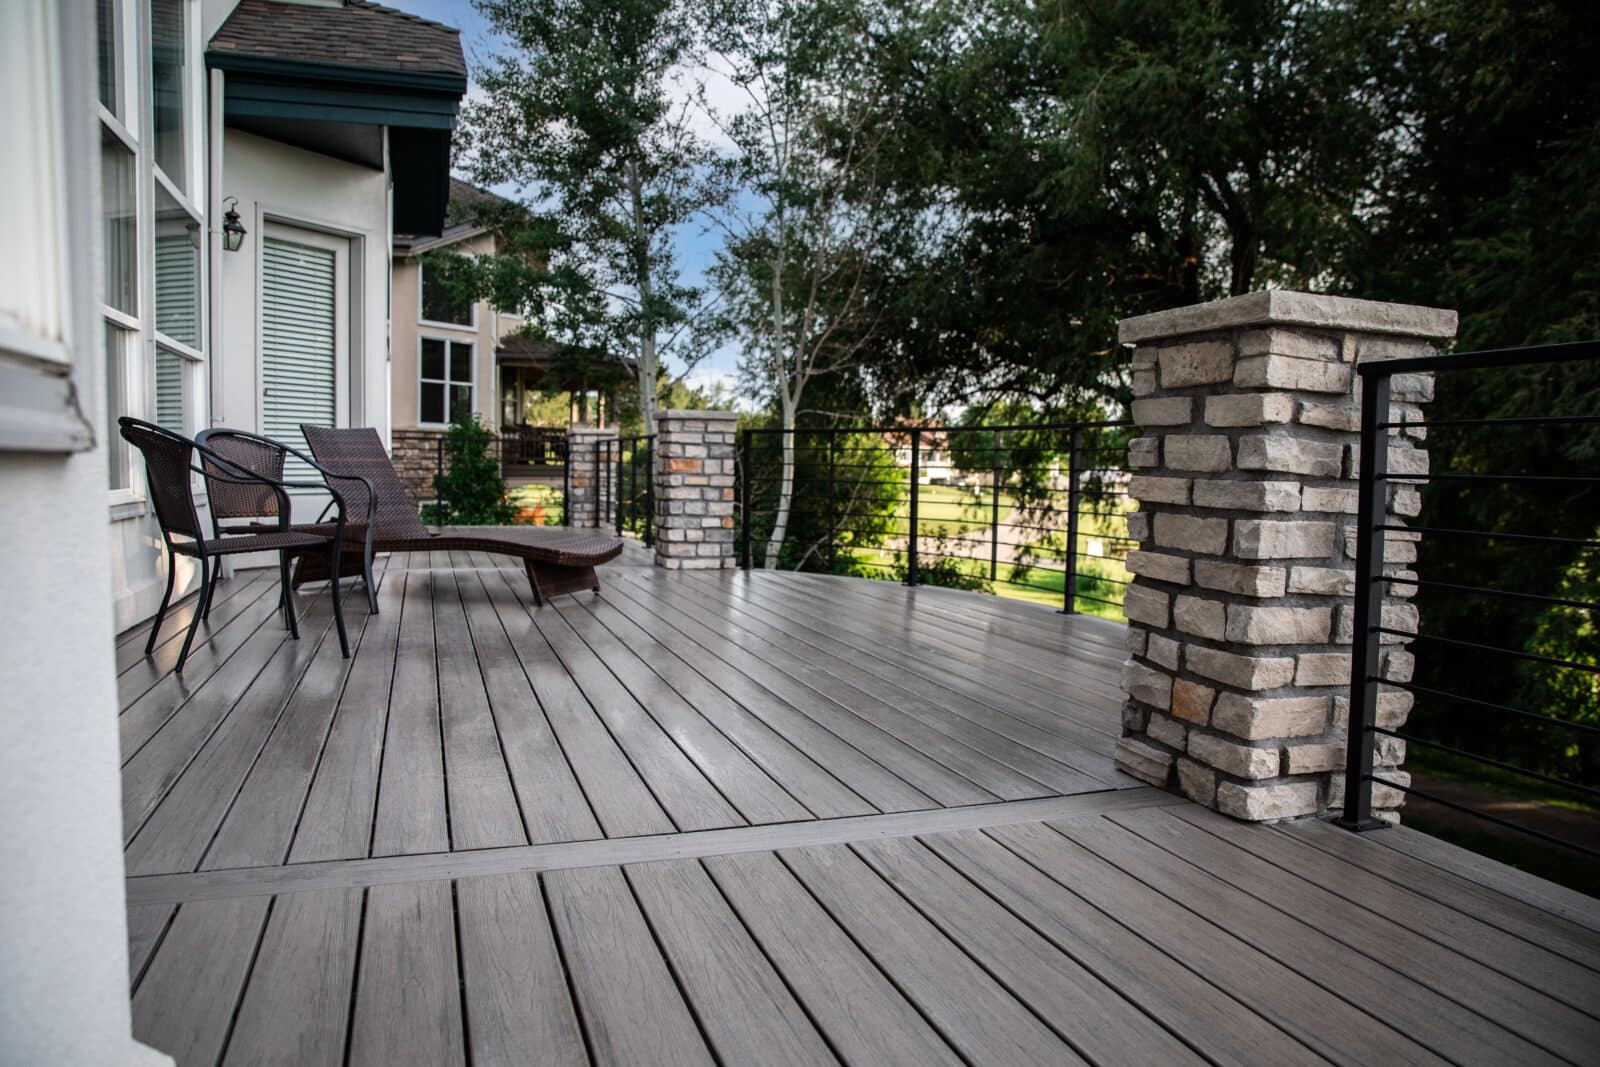 TimberTech deck with cable railing and columns.